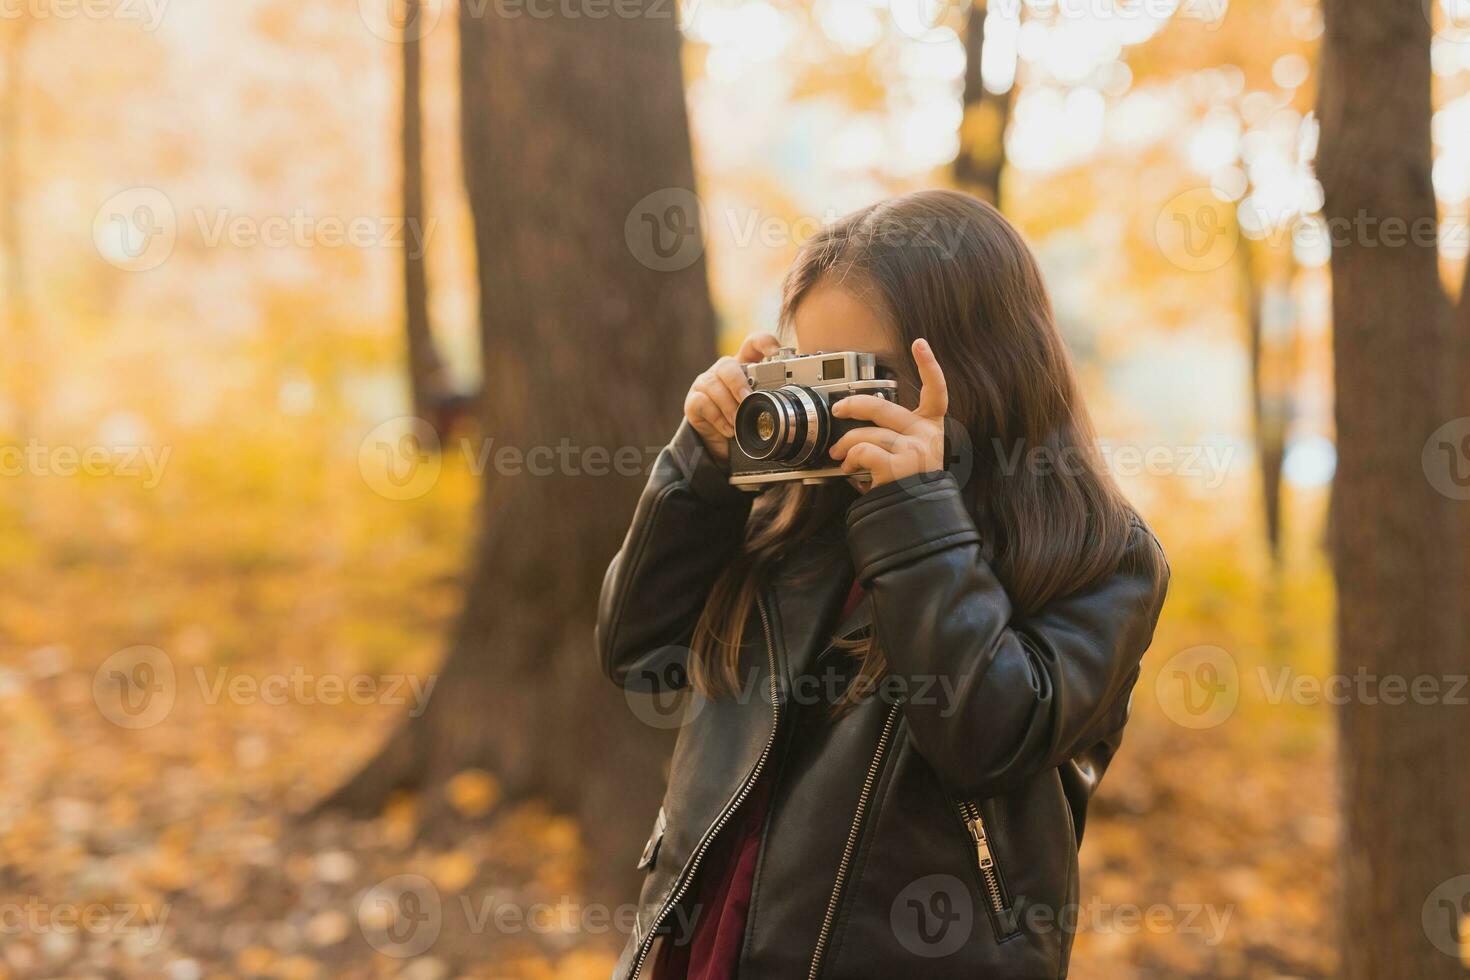 Child girl using an old-fashioned camera in autumn nature. Photographer, fall season and leisure concept. photo